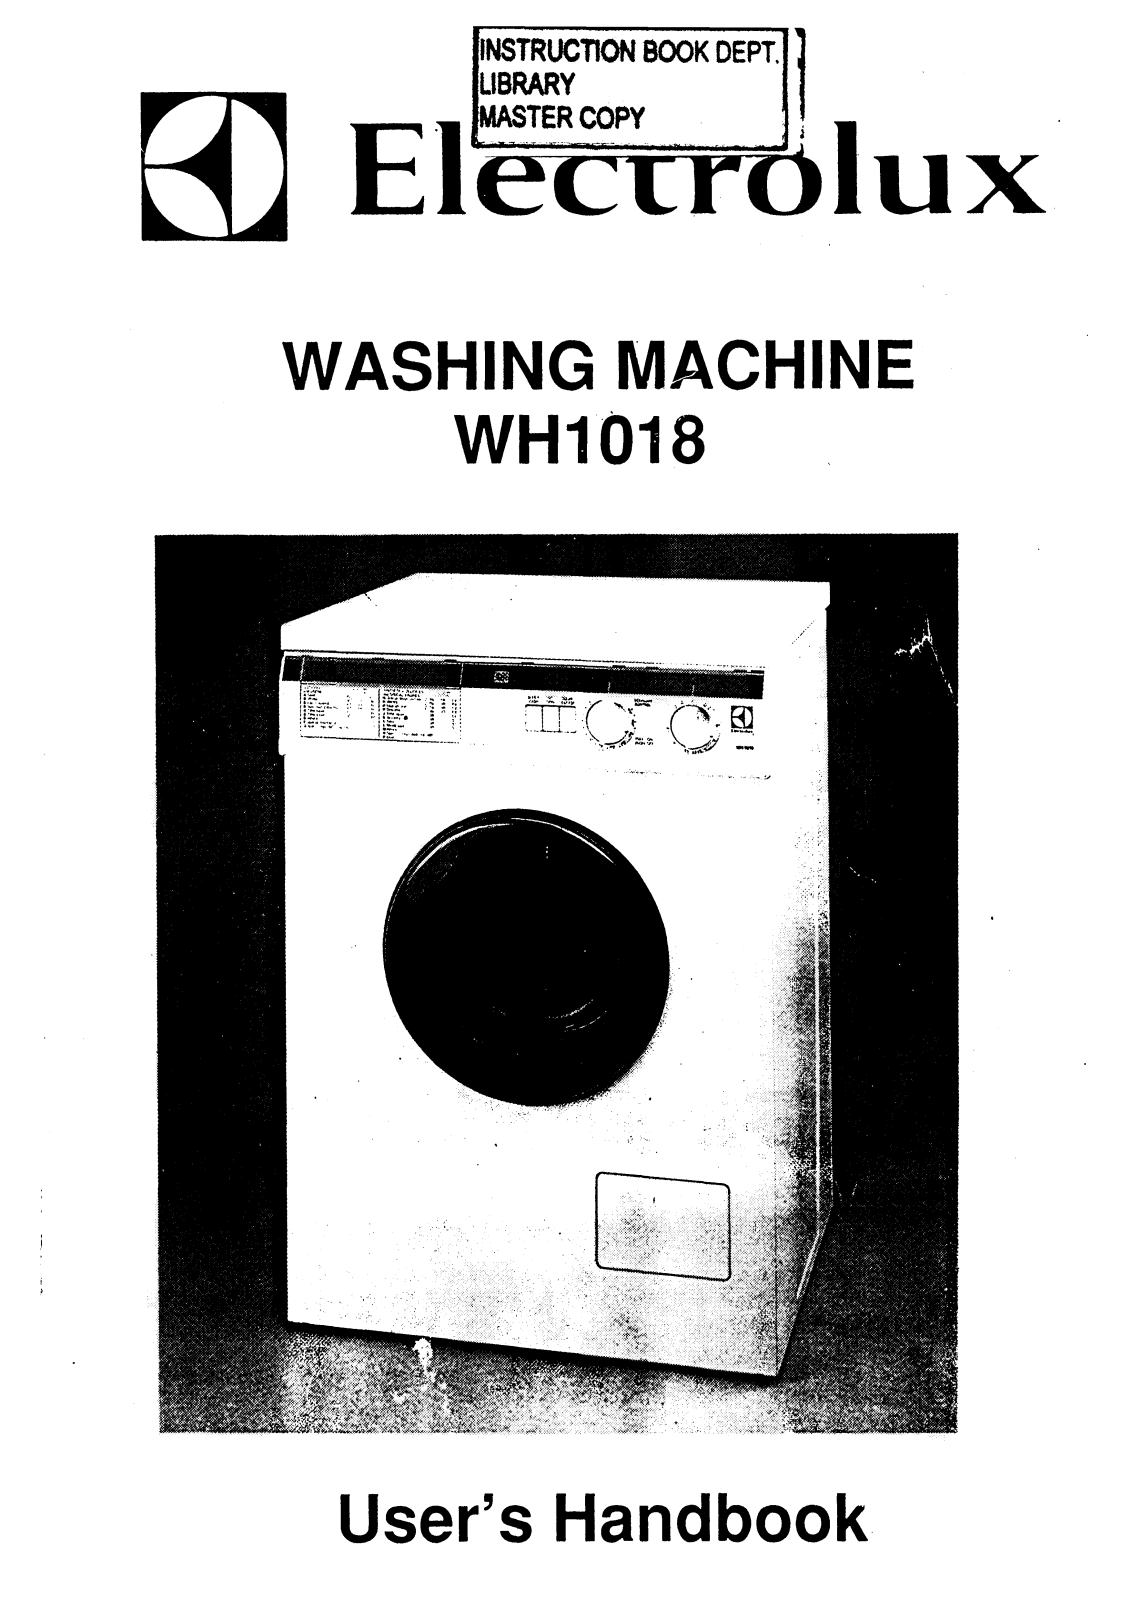 Electrolux WH1018 Instruction Manual